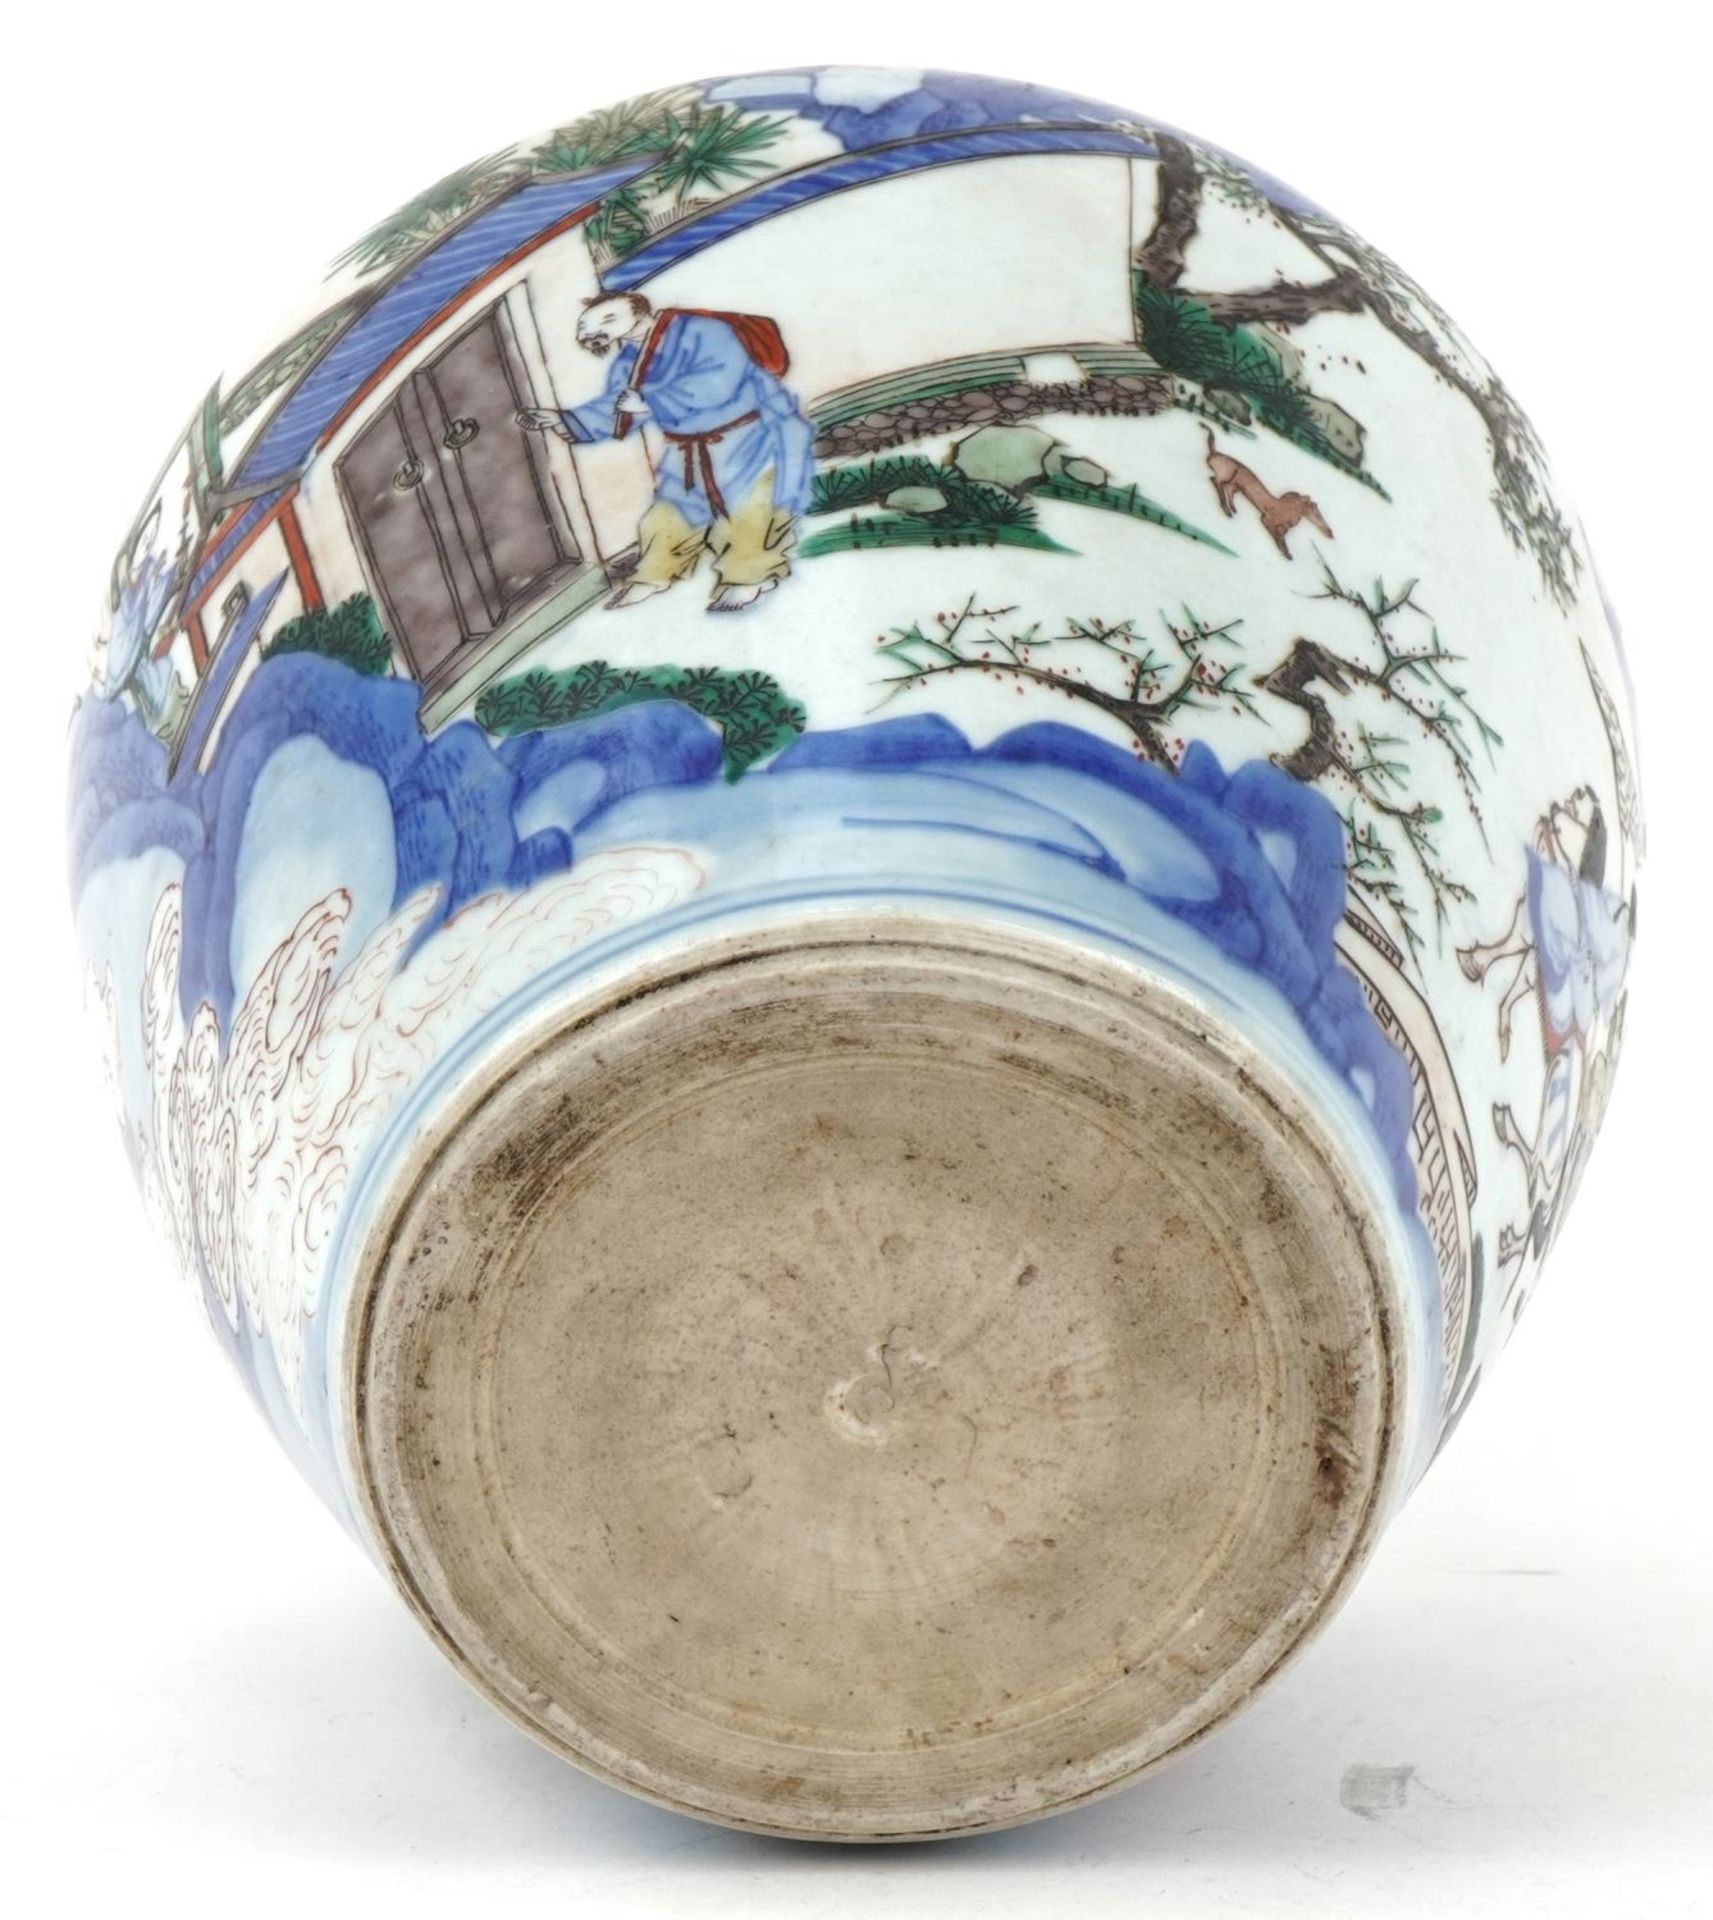 Large Chinese doucai porcelain vase hand painted with a figure on horseback and attendants - Image 7 of 7